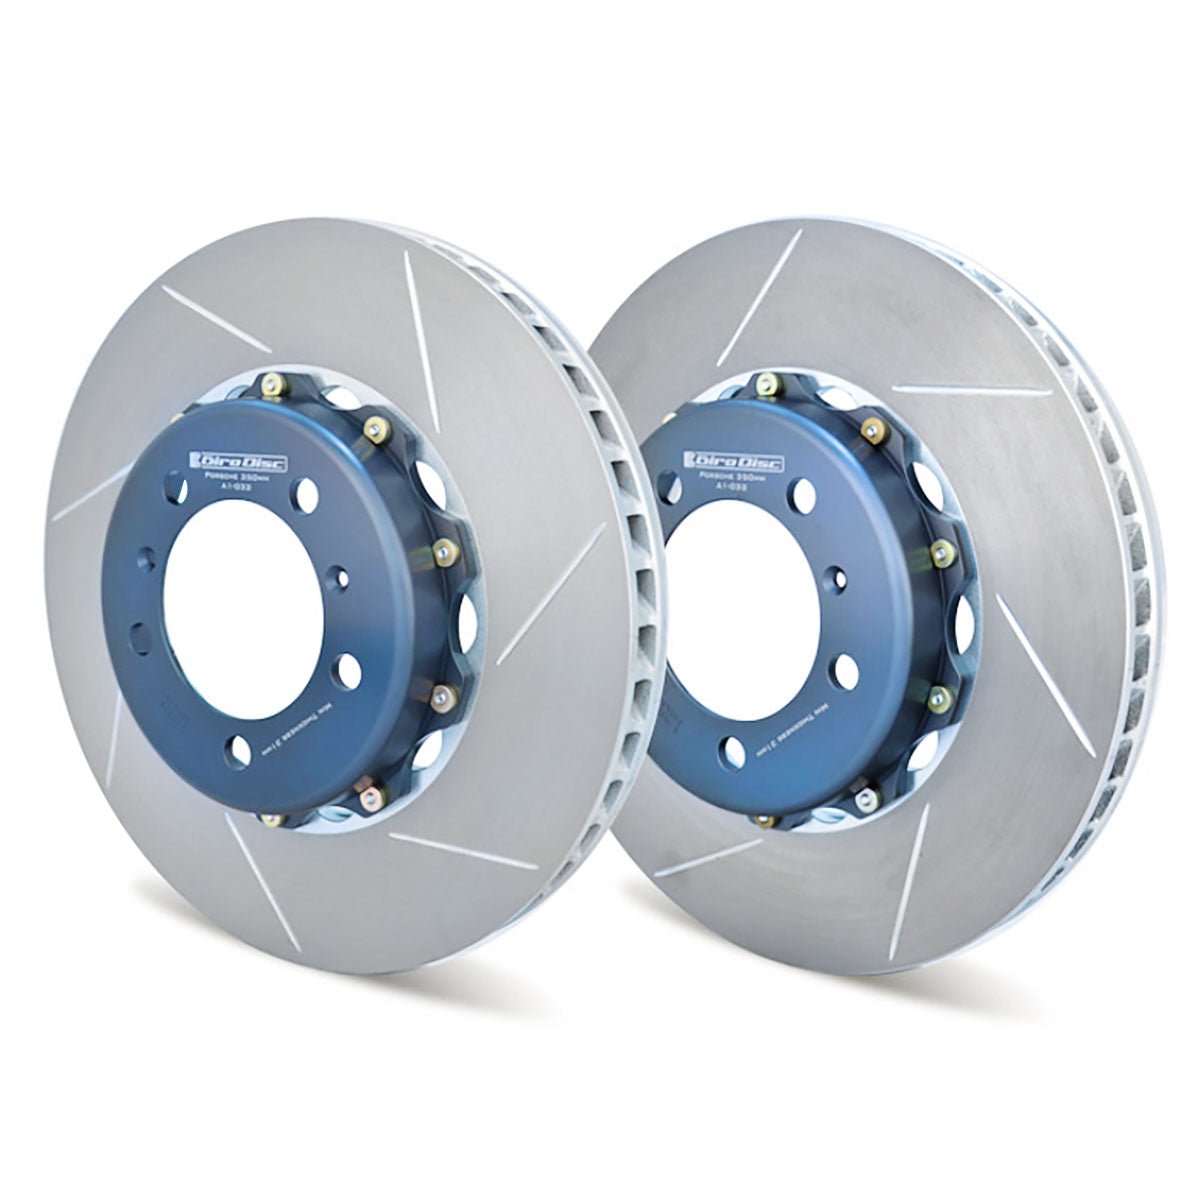 A1-032 Girodisc 2pc Front Brake Rotors (OEM PCCB) - Competition Motorsport